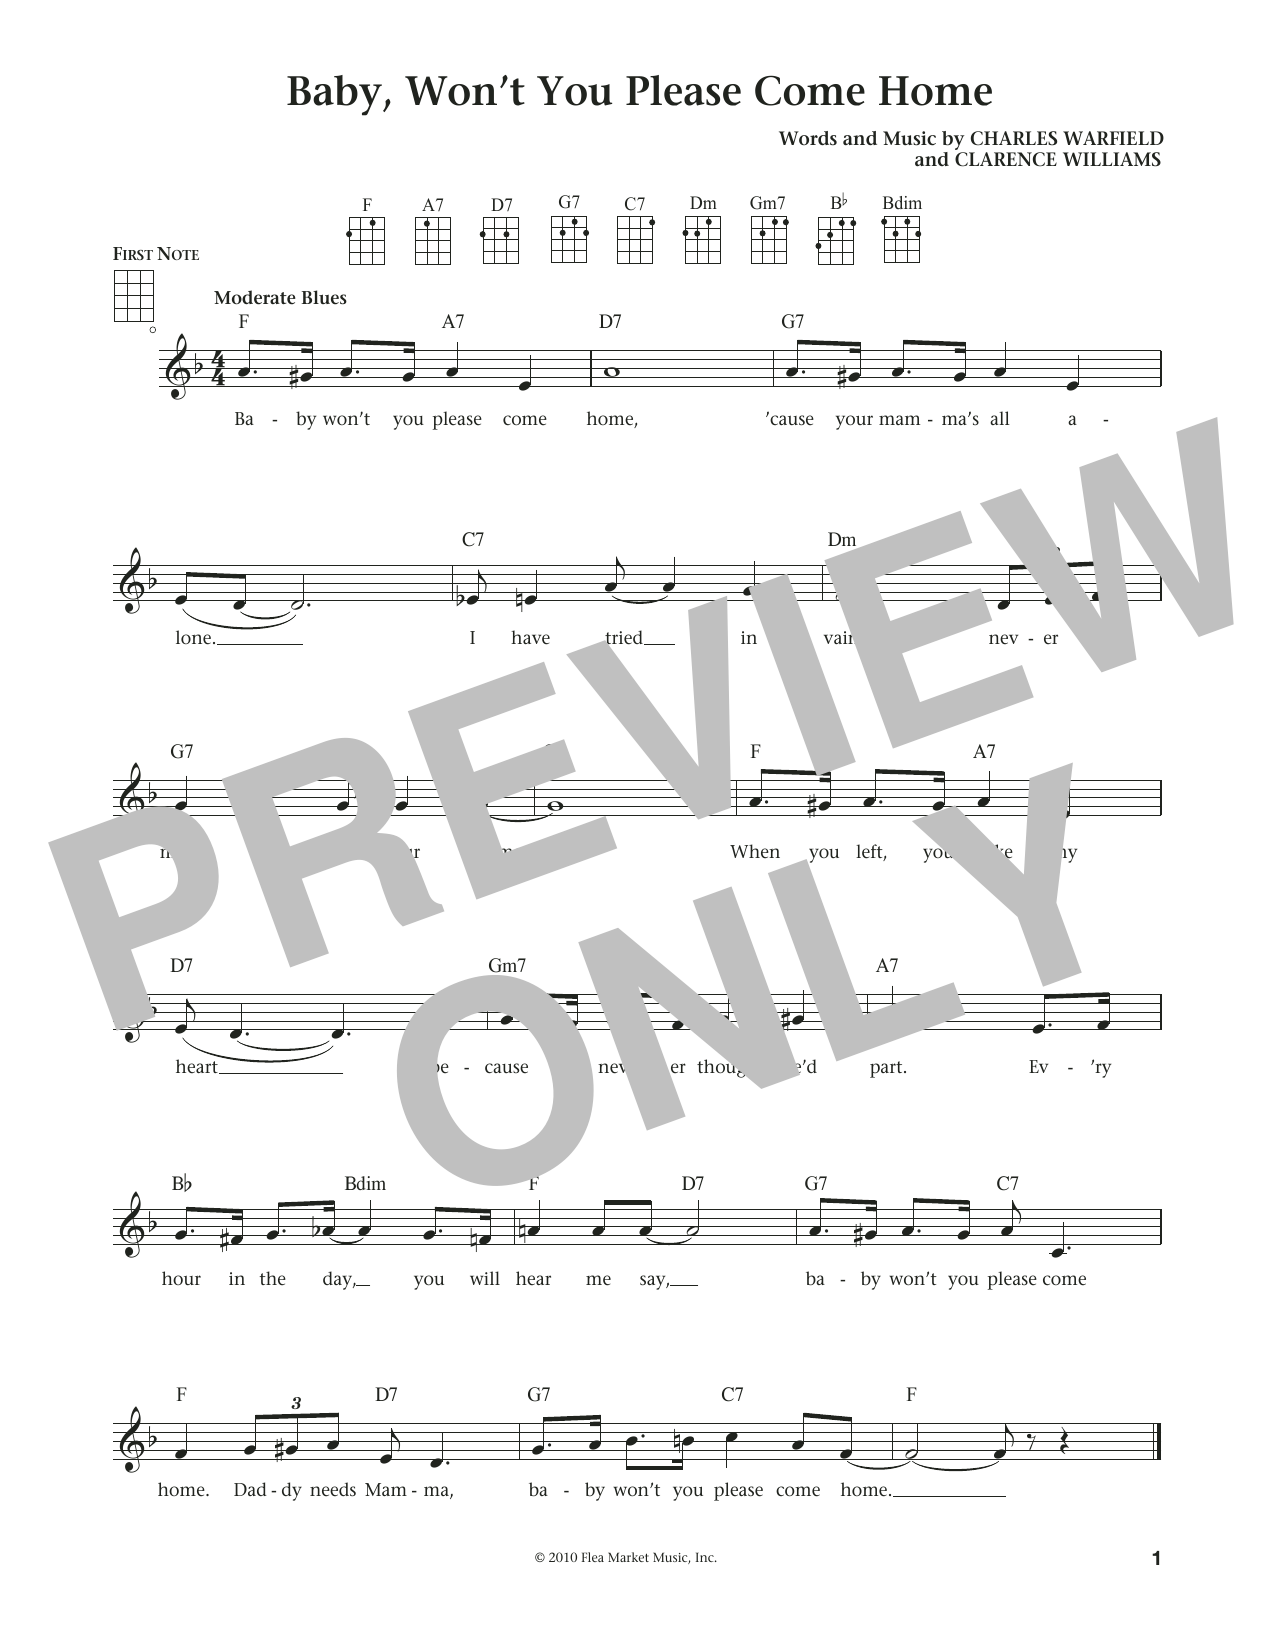 Download Charles Warfield Baby, Won't You Please Come Home (from Sheet Music